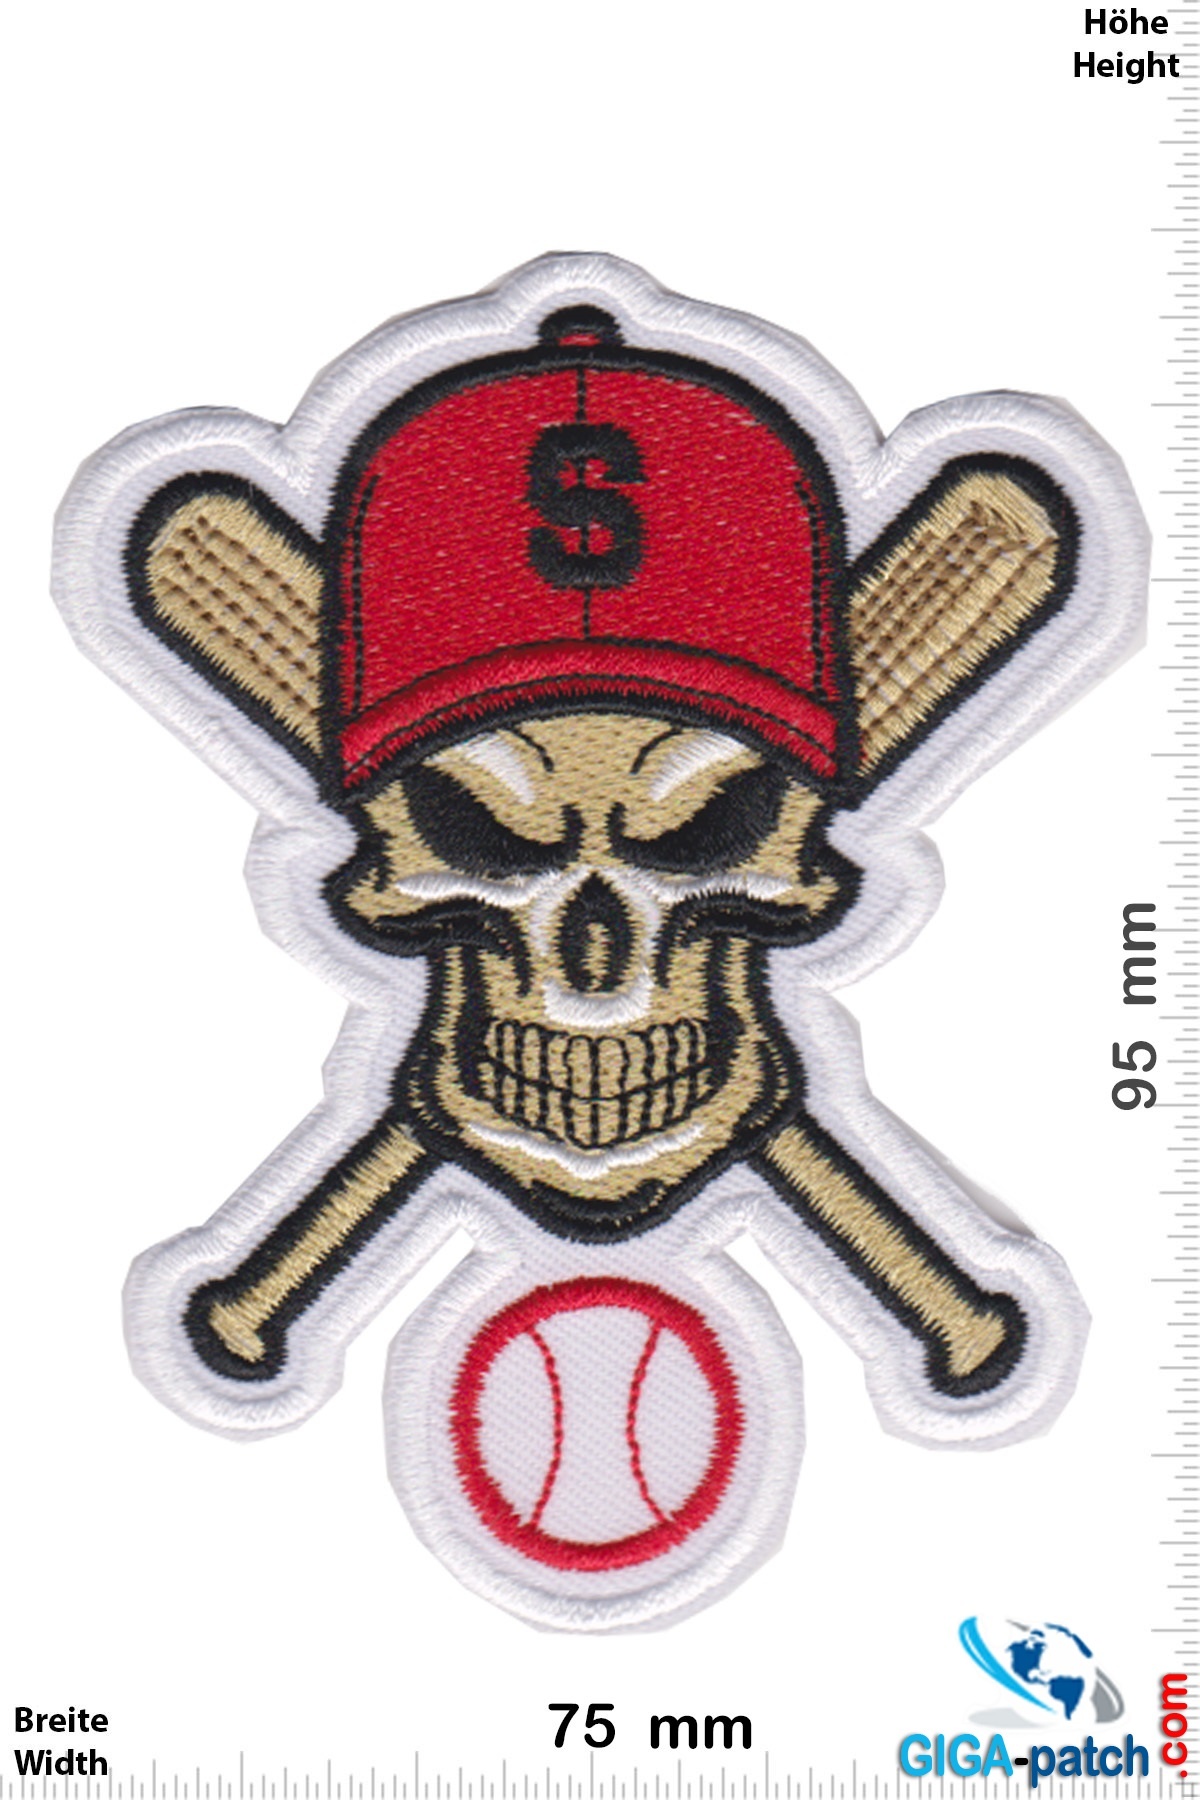 Baseball - Baseball - Skull- Patch - Back Patches - Patch Keychains  Stickers -  - Biggest Patch Shop worldwide